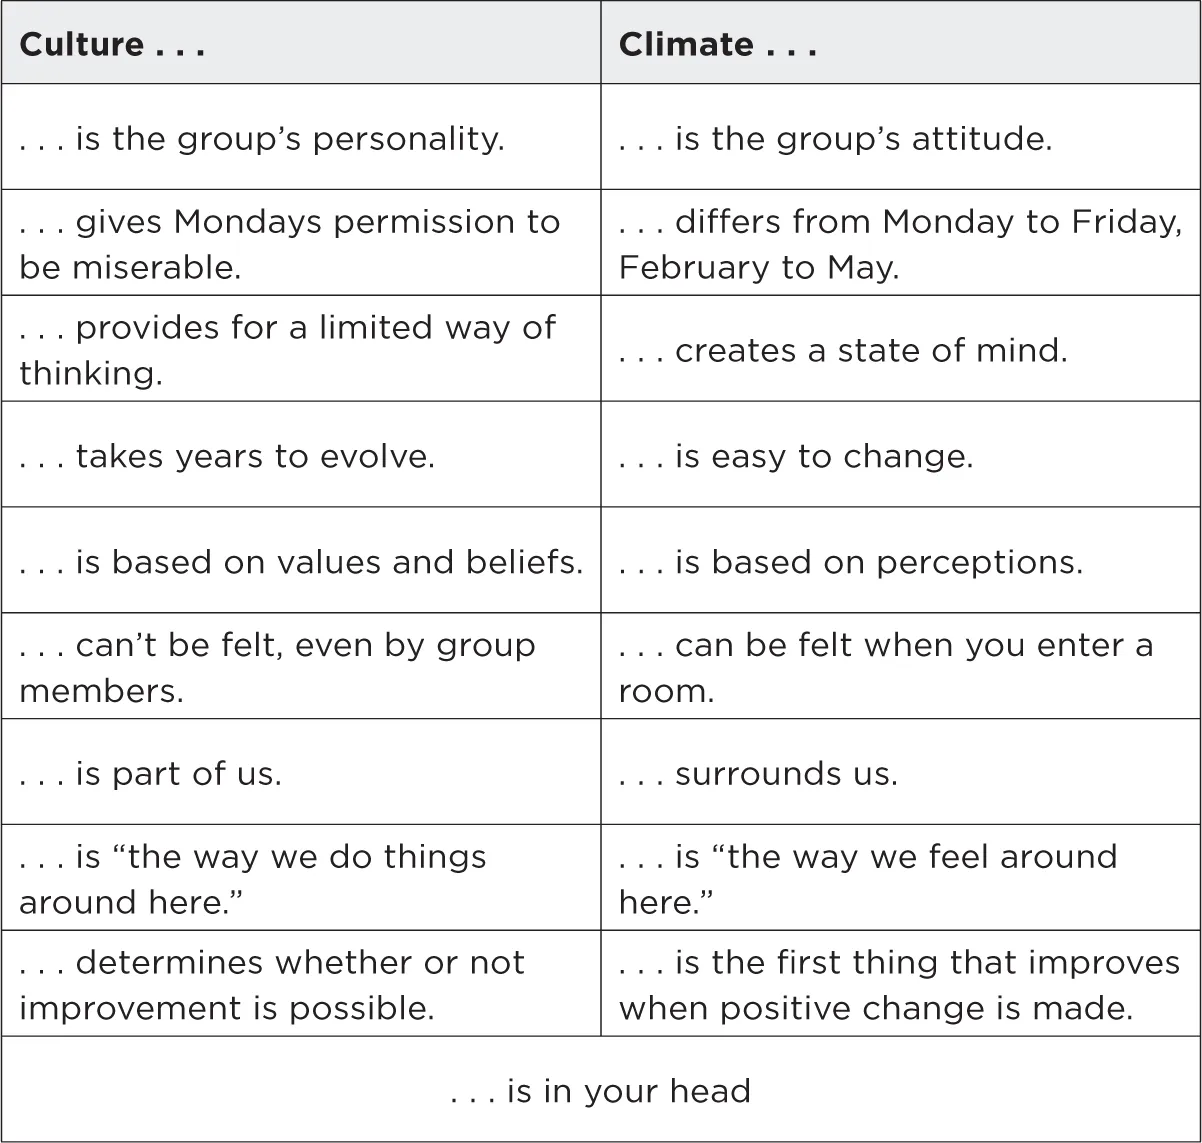 Fig 2.1 Some Differences Between Climate and Culture